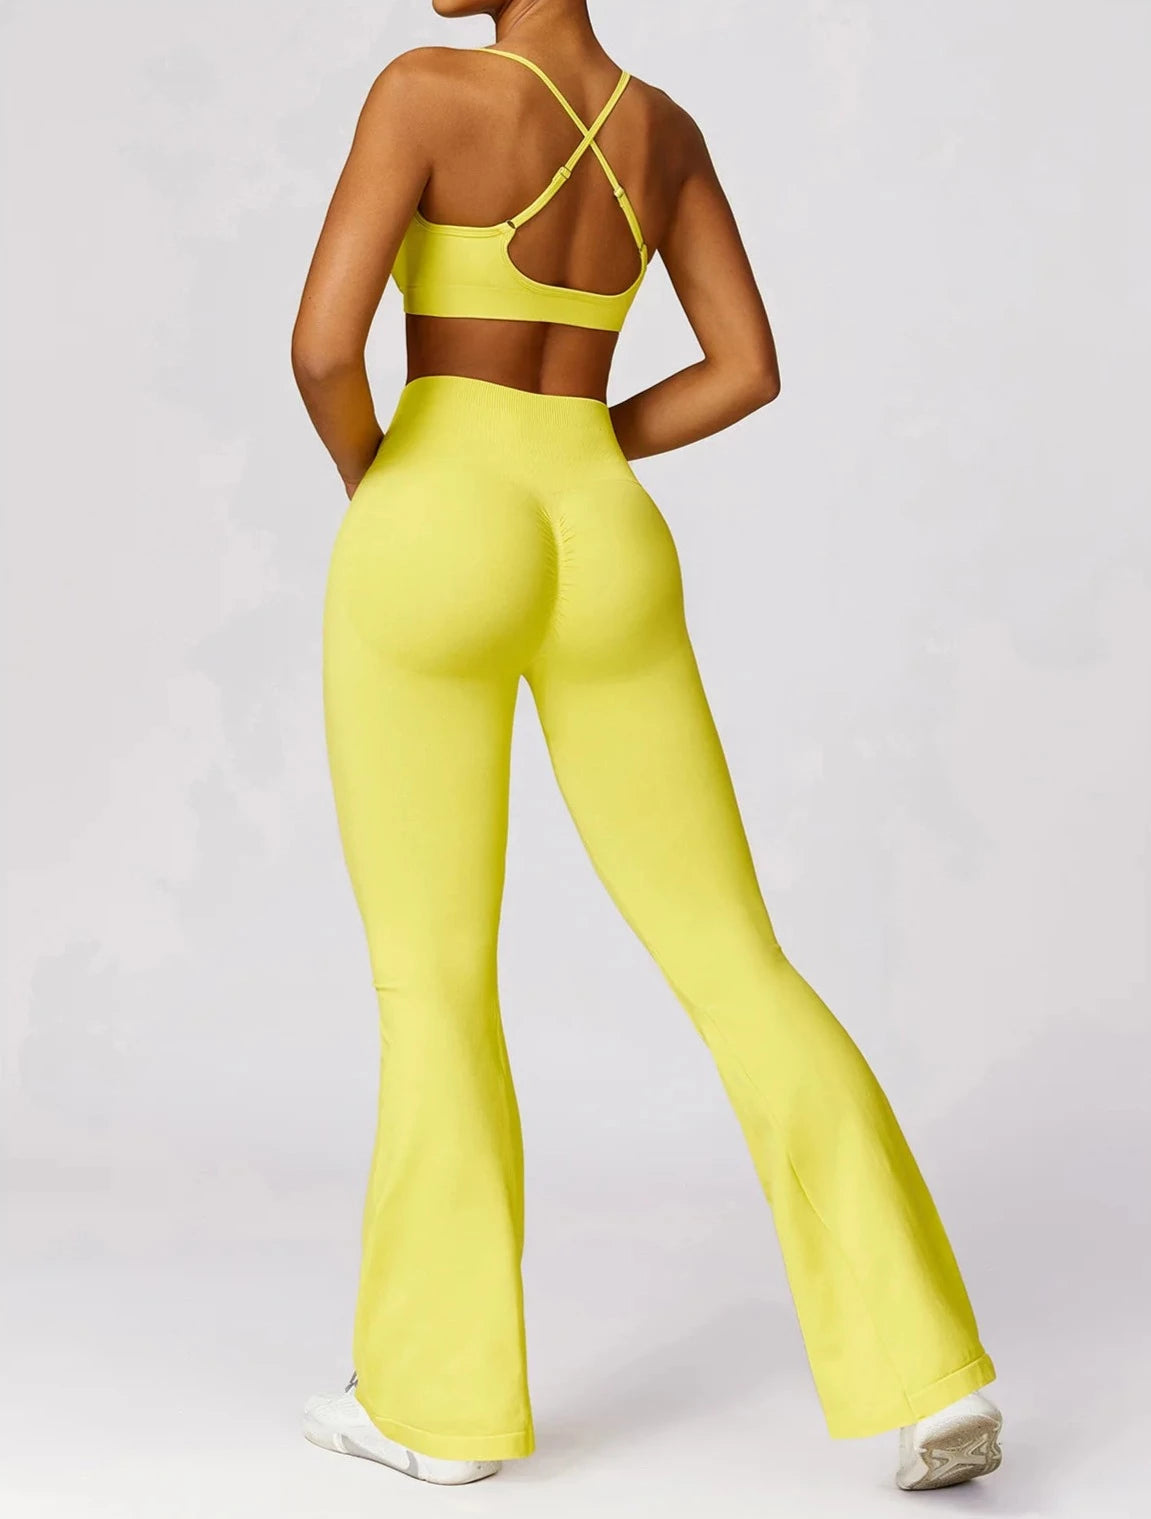 Seamless Serenity Flare Set - Leggings + Top Sets Starlethics Yellow S 